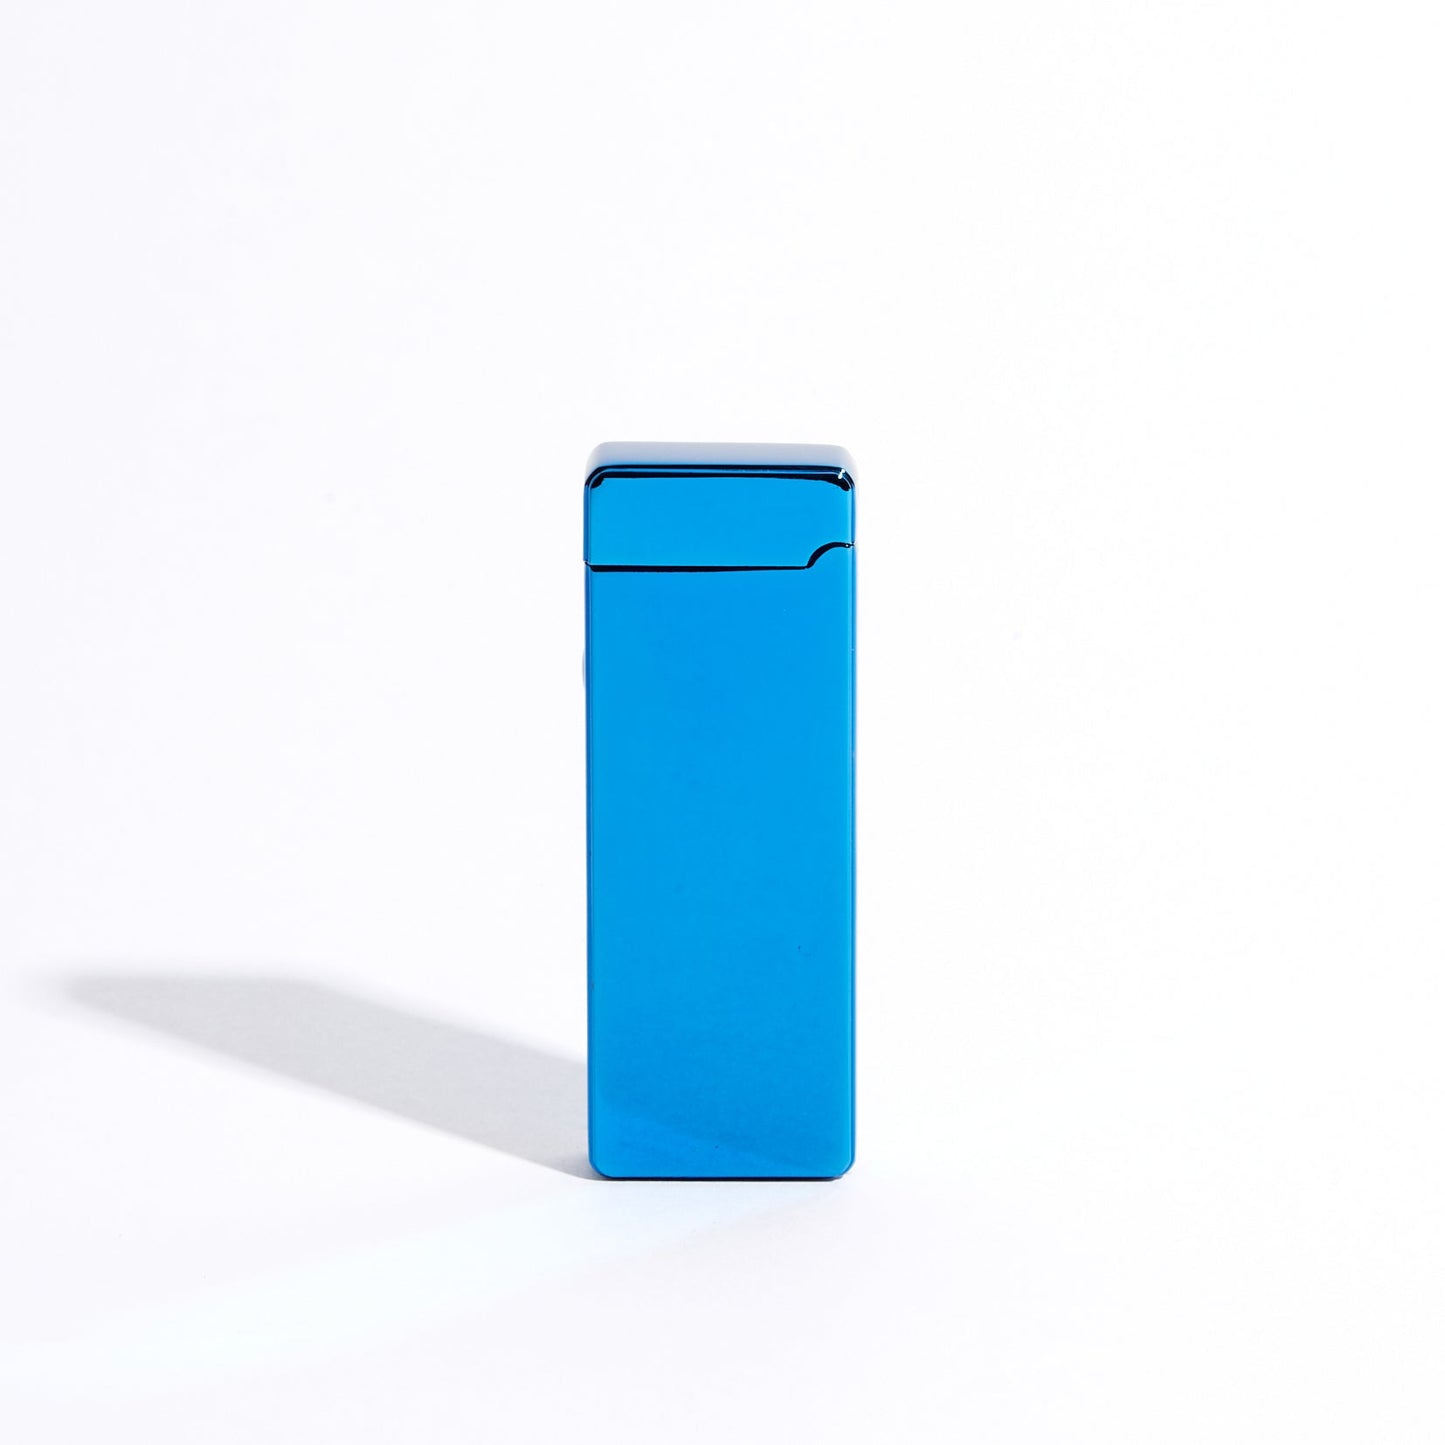 The Pocket Lighter by The USB Lighter Company